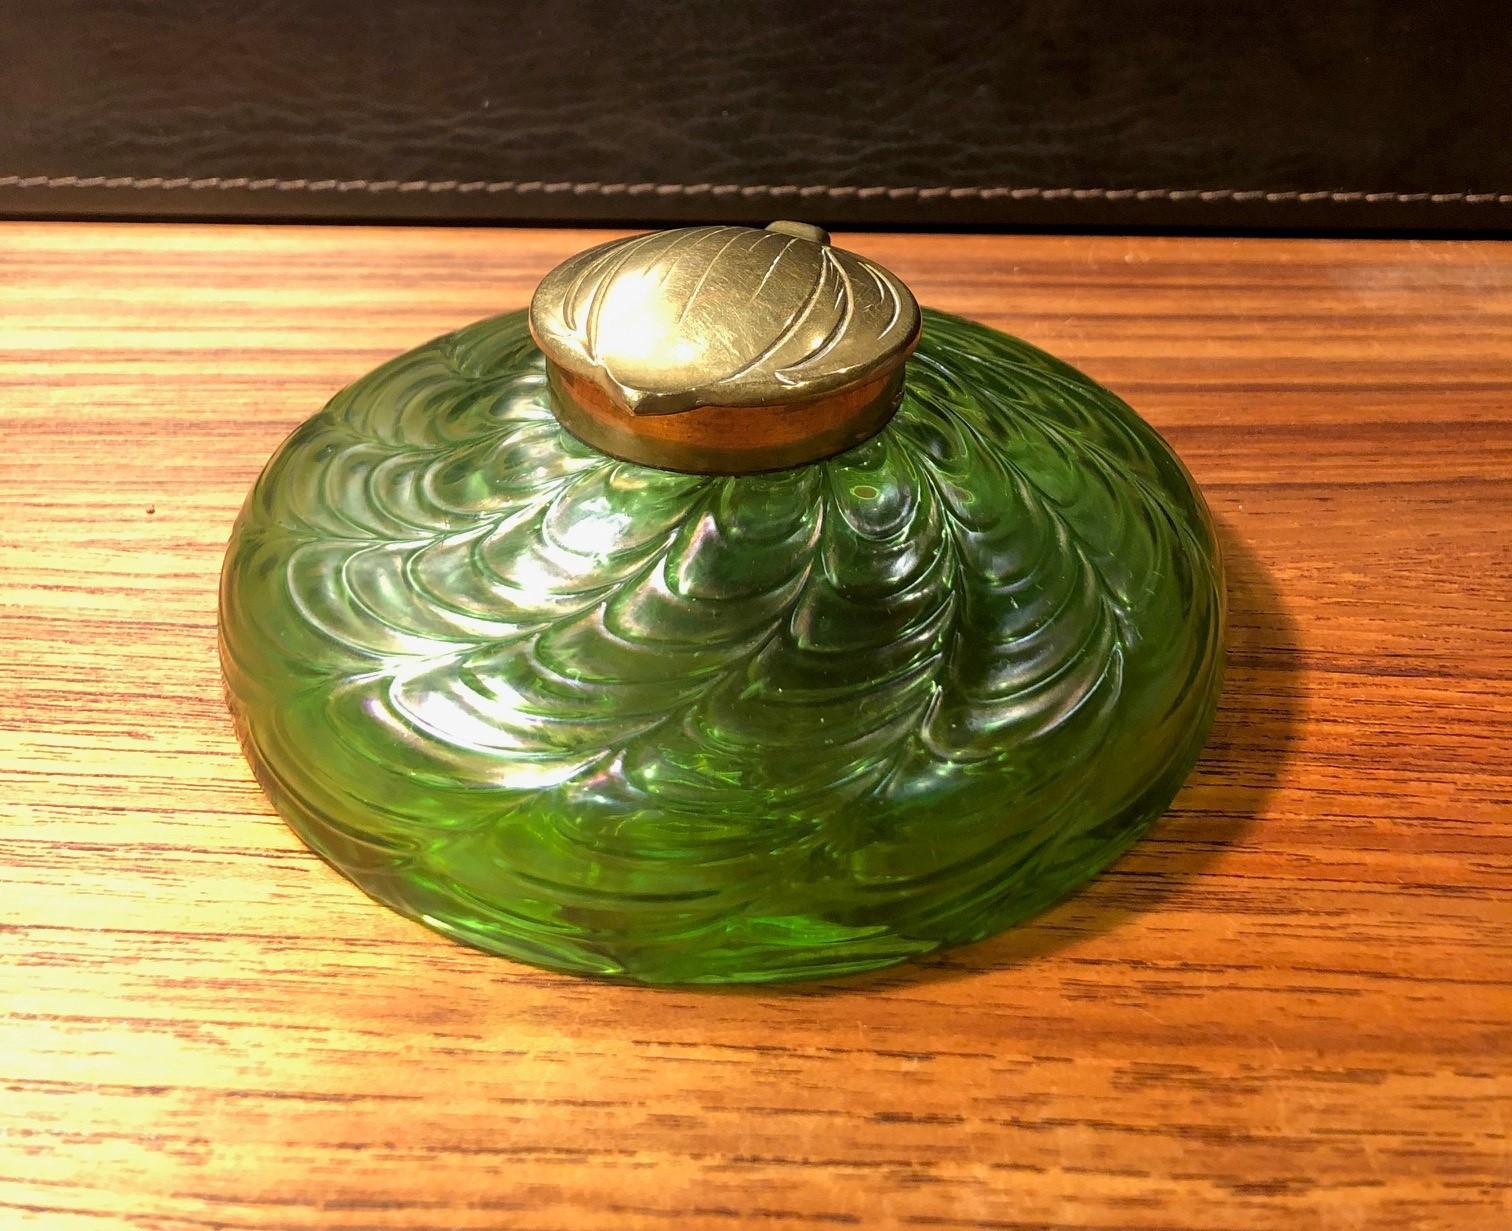 Stunning early Art Nouveau iridescent art glass inkwell, circa 1900s. The piece features a gorgeous array of rainbow iridescence from greens to blues to yellows. The inkwell is capped with a gorgeous brass leaf motif lid and rim. Also includes